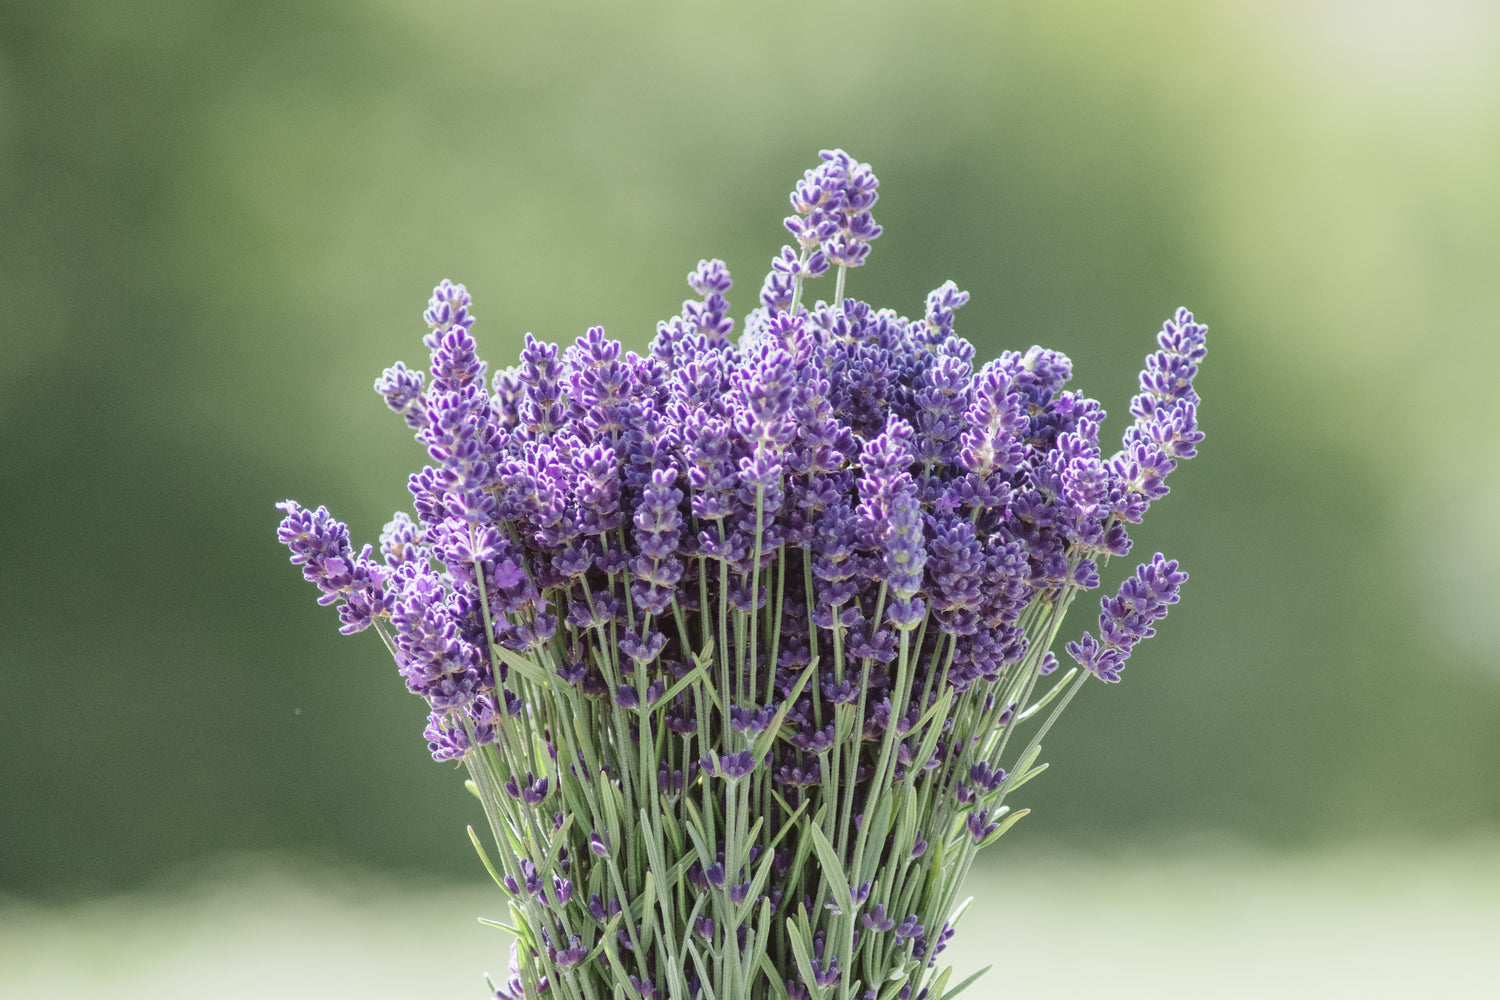 A close-up of a fresh purple bundle of lavender with a grassy green blurry background.